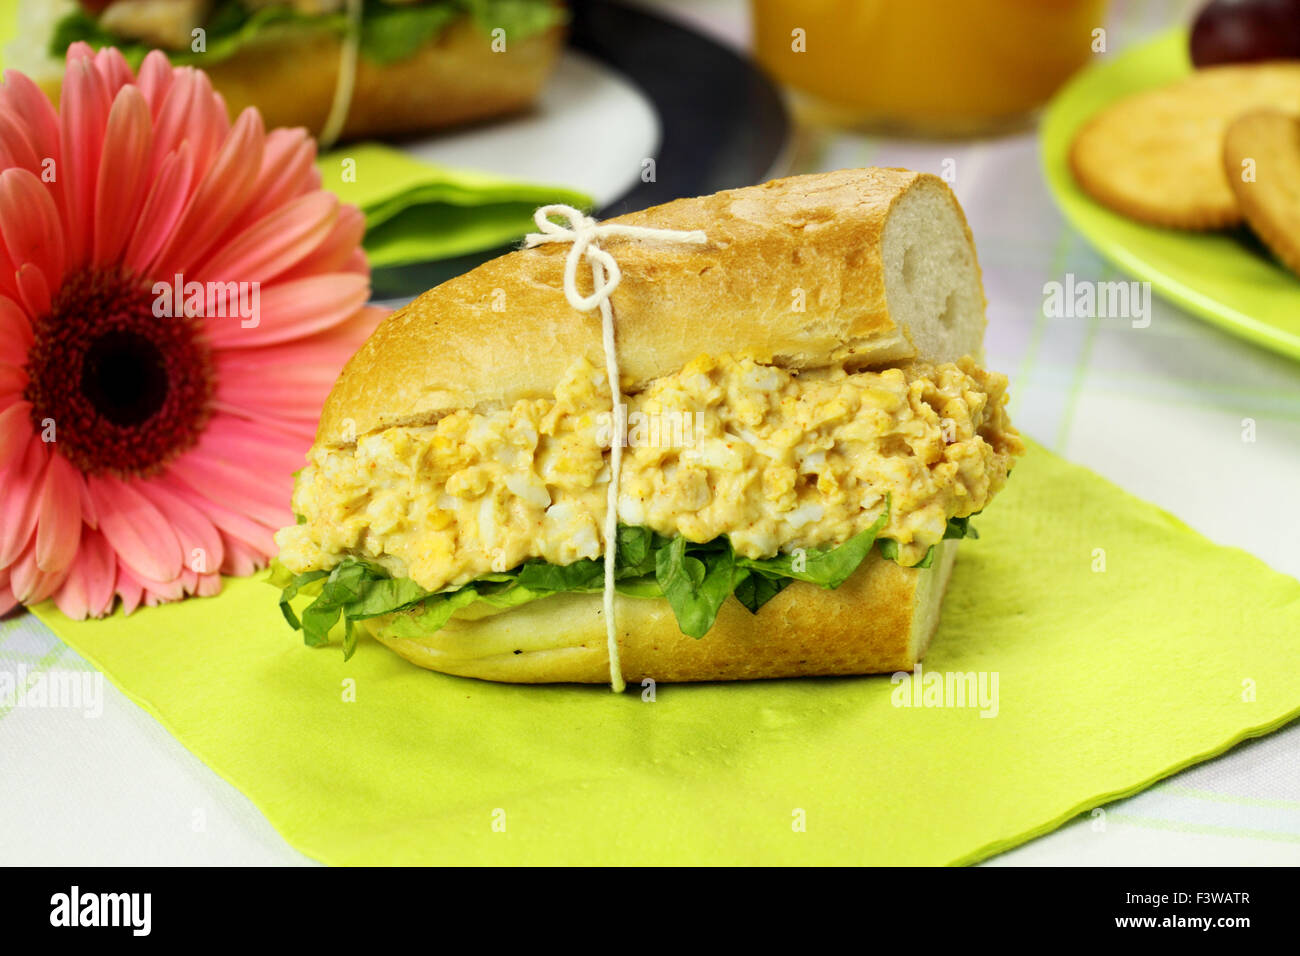 Curried Egg And Lettuce Roll Stock Photo